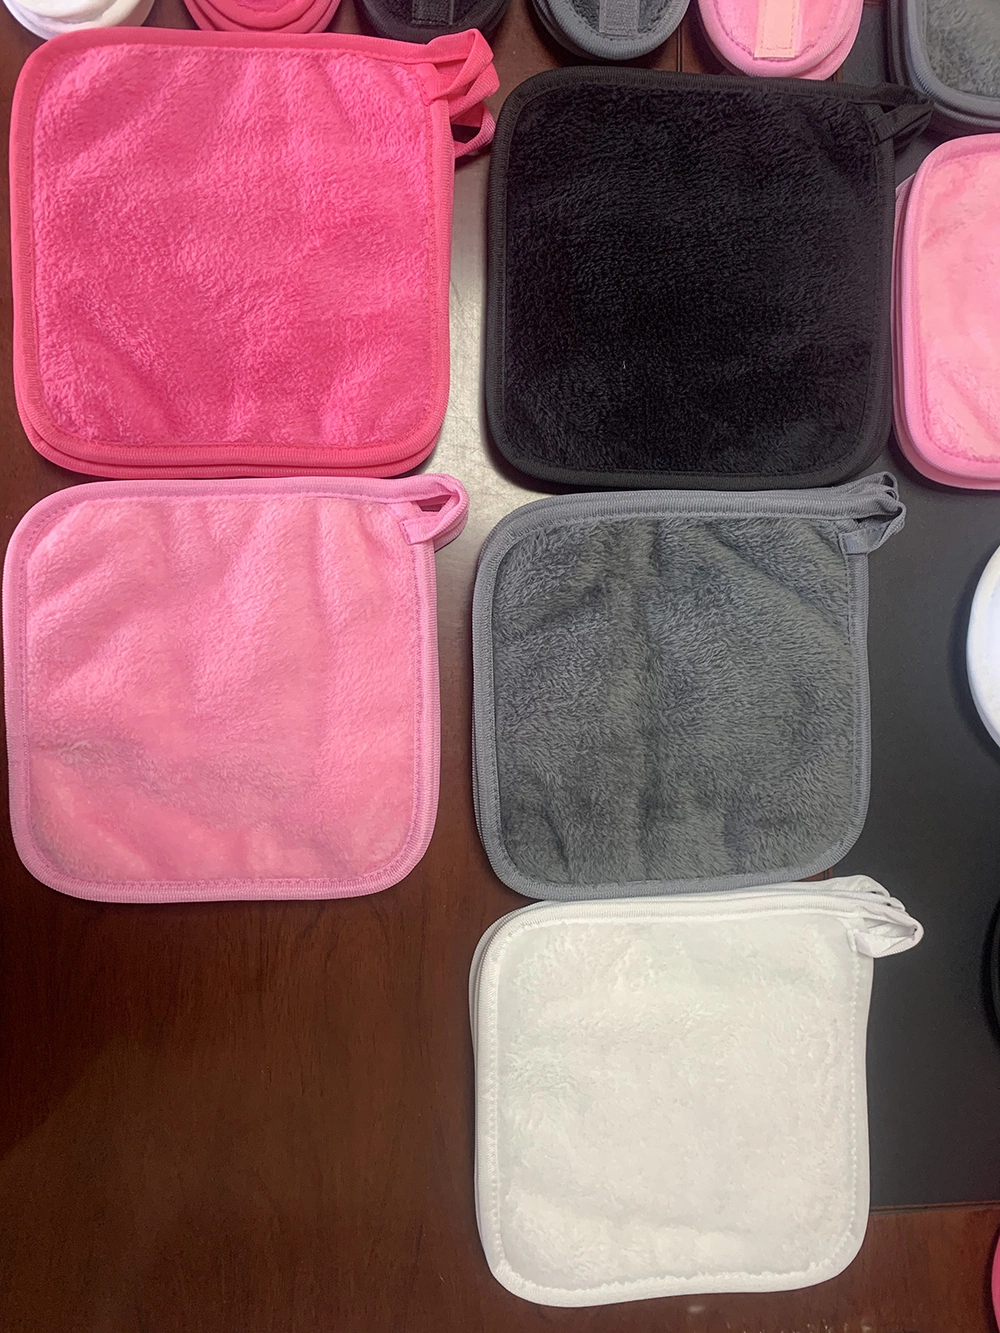 Makeup Remover Cloth Reusable Microfiber Cleansing Towel, Suitable for All Skin Types, Move Makeup Instantly Multiple Colours, 5 Pack